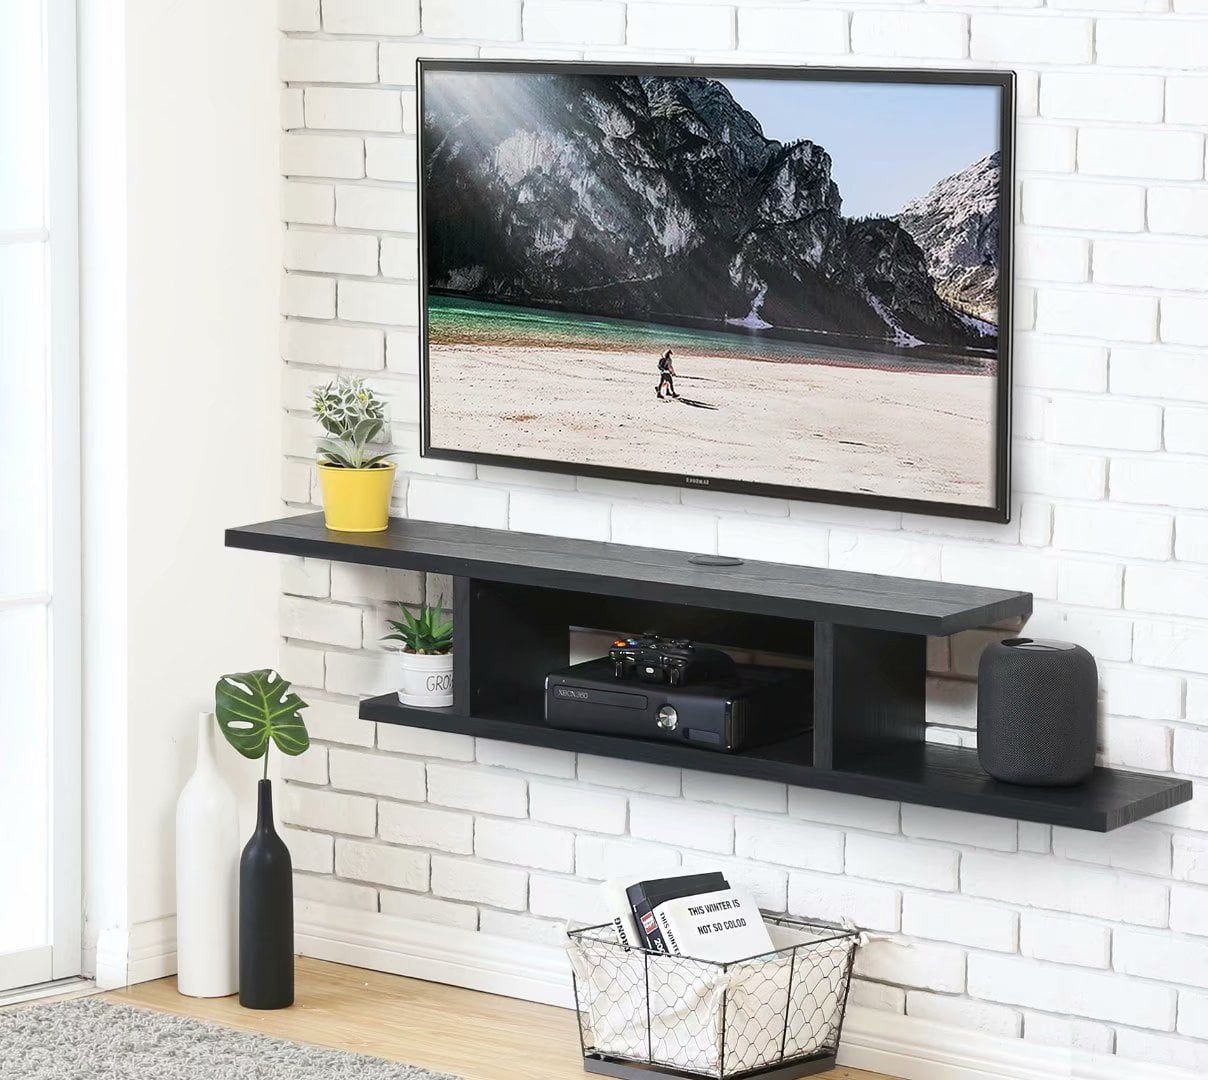 Fitueyes Floating Tv Shelf Wall Mounted Media Console Entertainment Intended For Top Shelf Mount Tv Stands (Gallery 4 of 20)